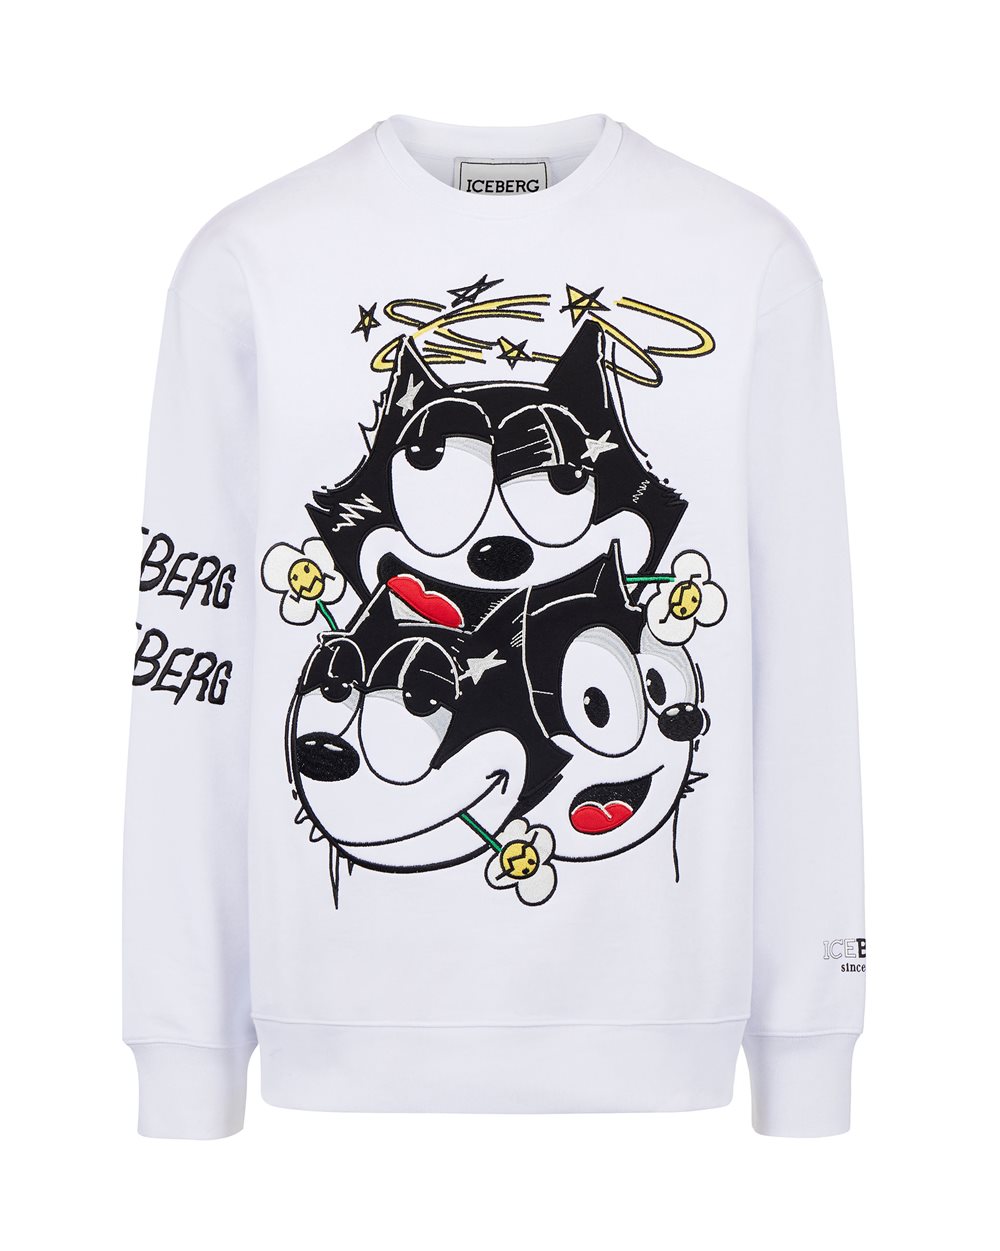 Sweatshirt with cartoon graphics and logo - VALENTINE'S DAY GIFTS | Iceberg - Official Website